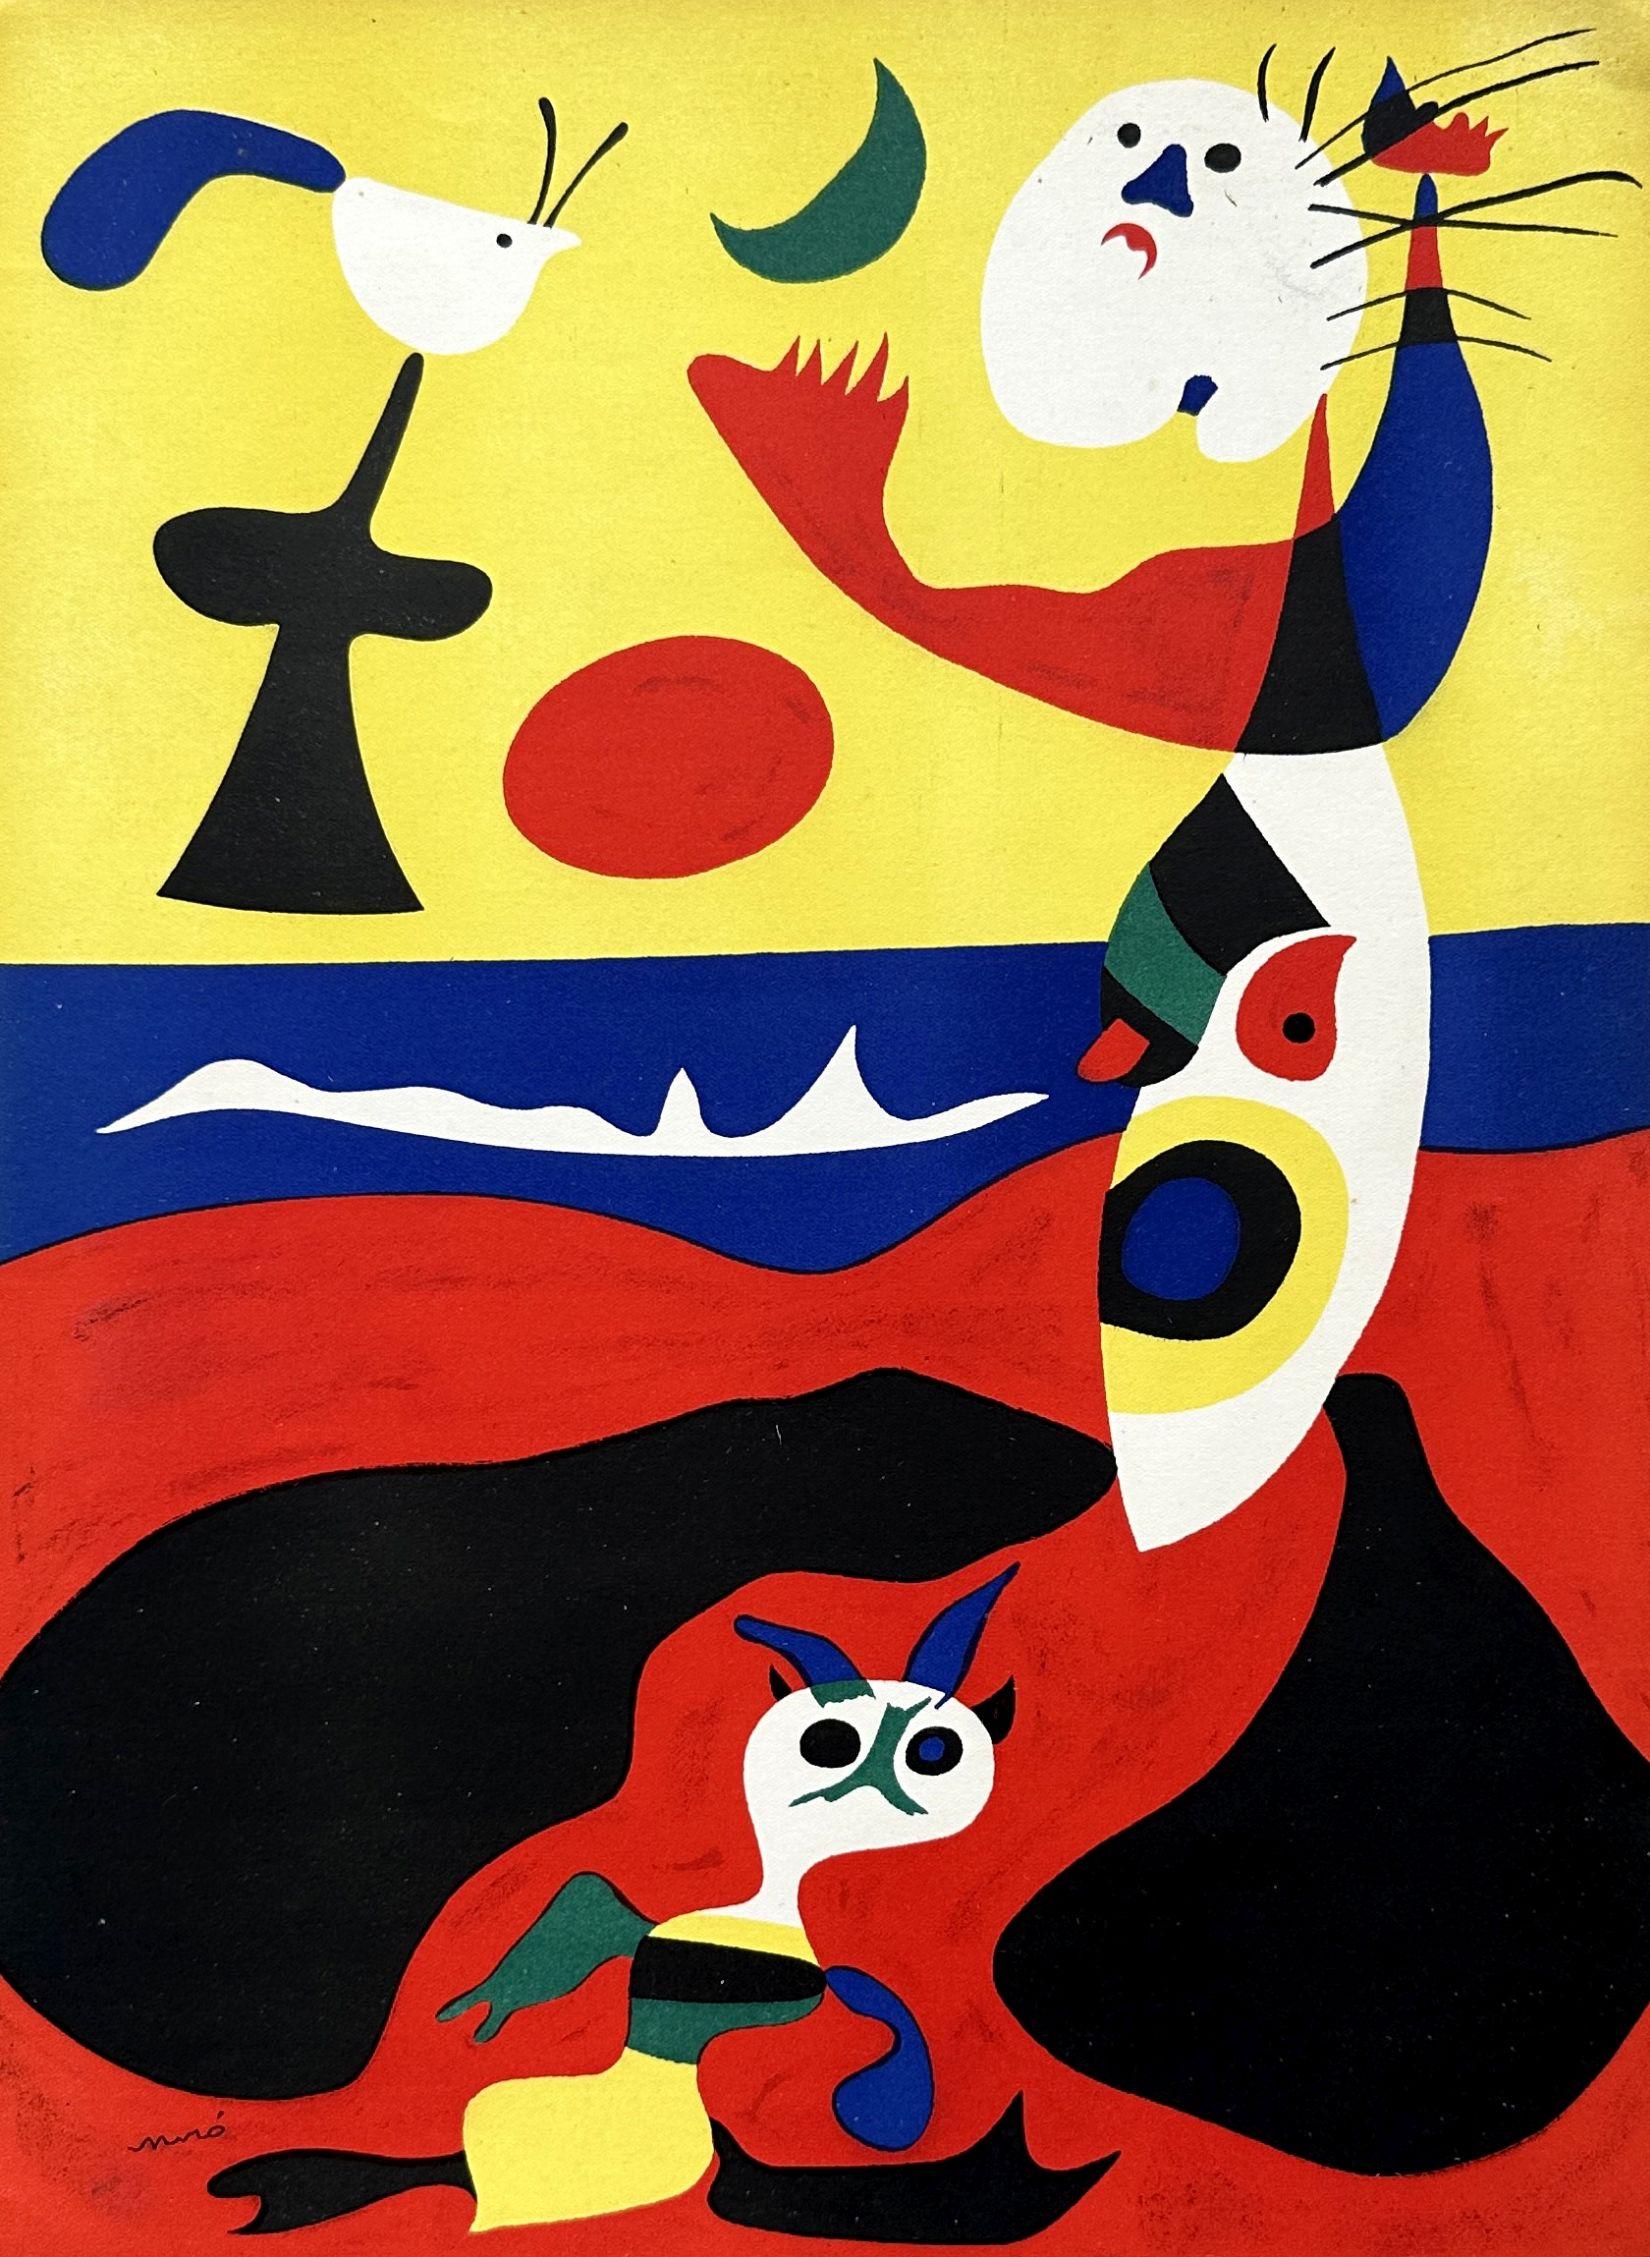 Joan Miró Figurative Print - Summer : Surrealist Figures with the Moon - Lithograph, Plate Signed #MOURLOT